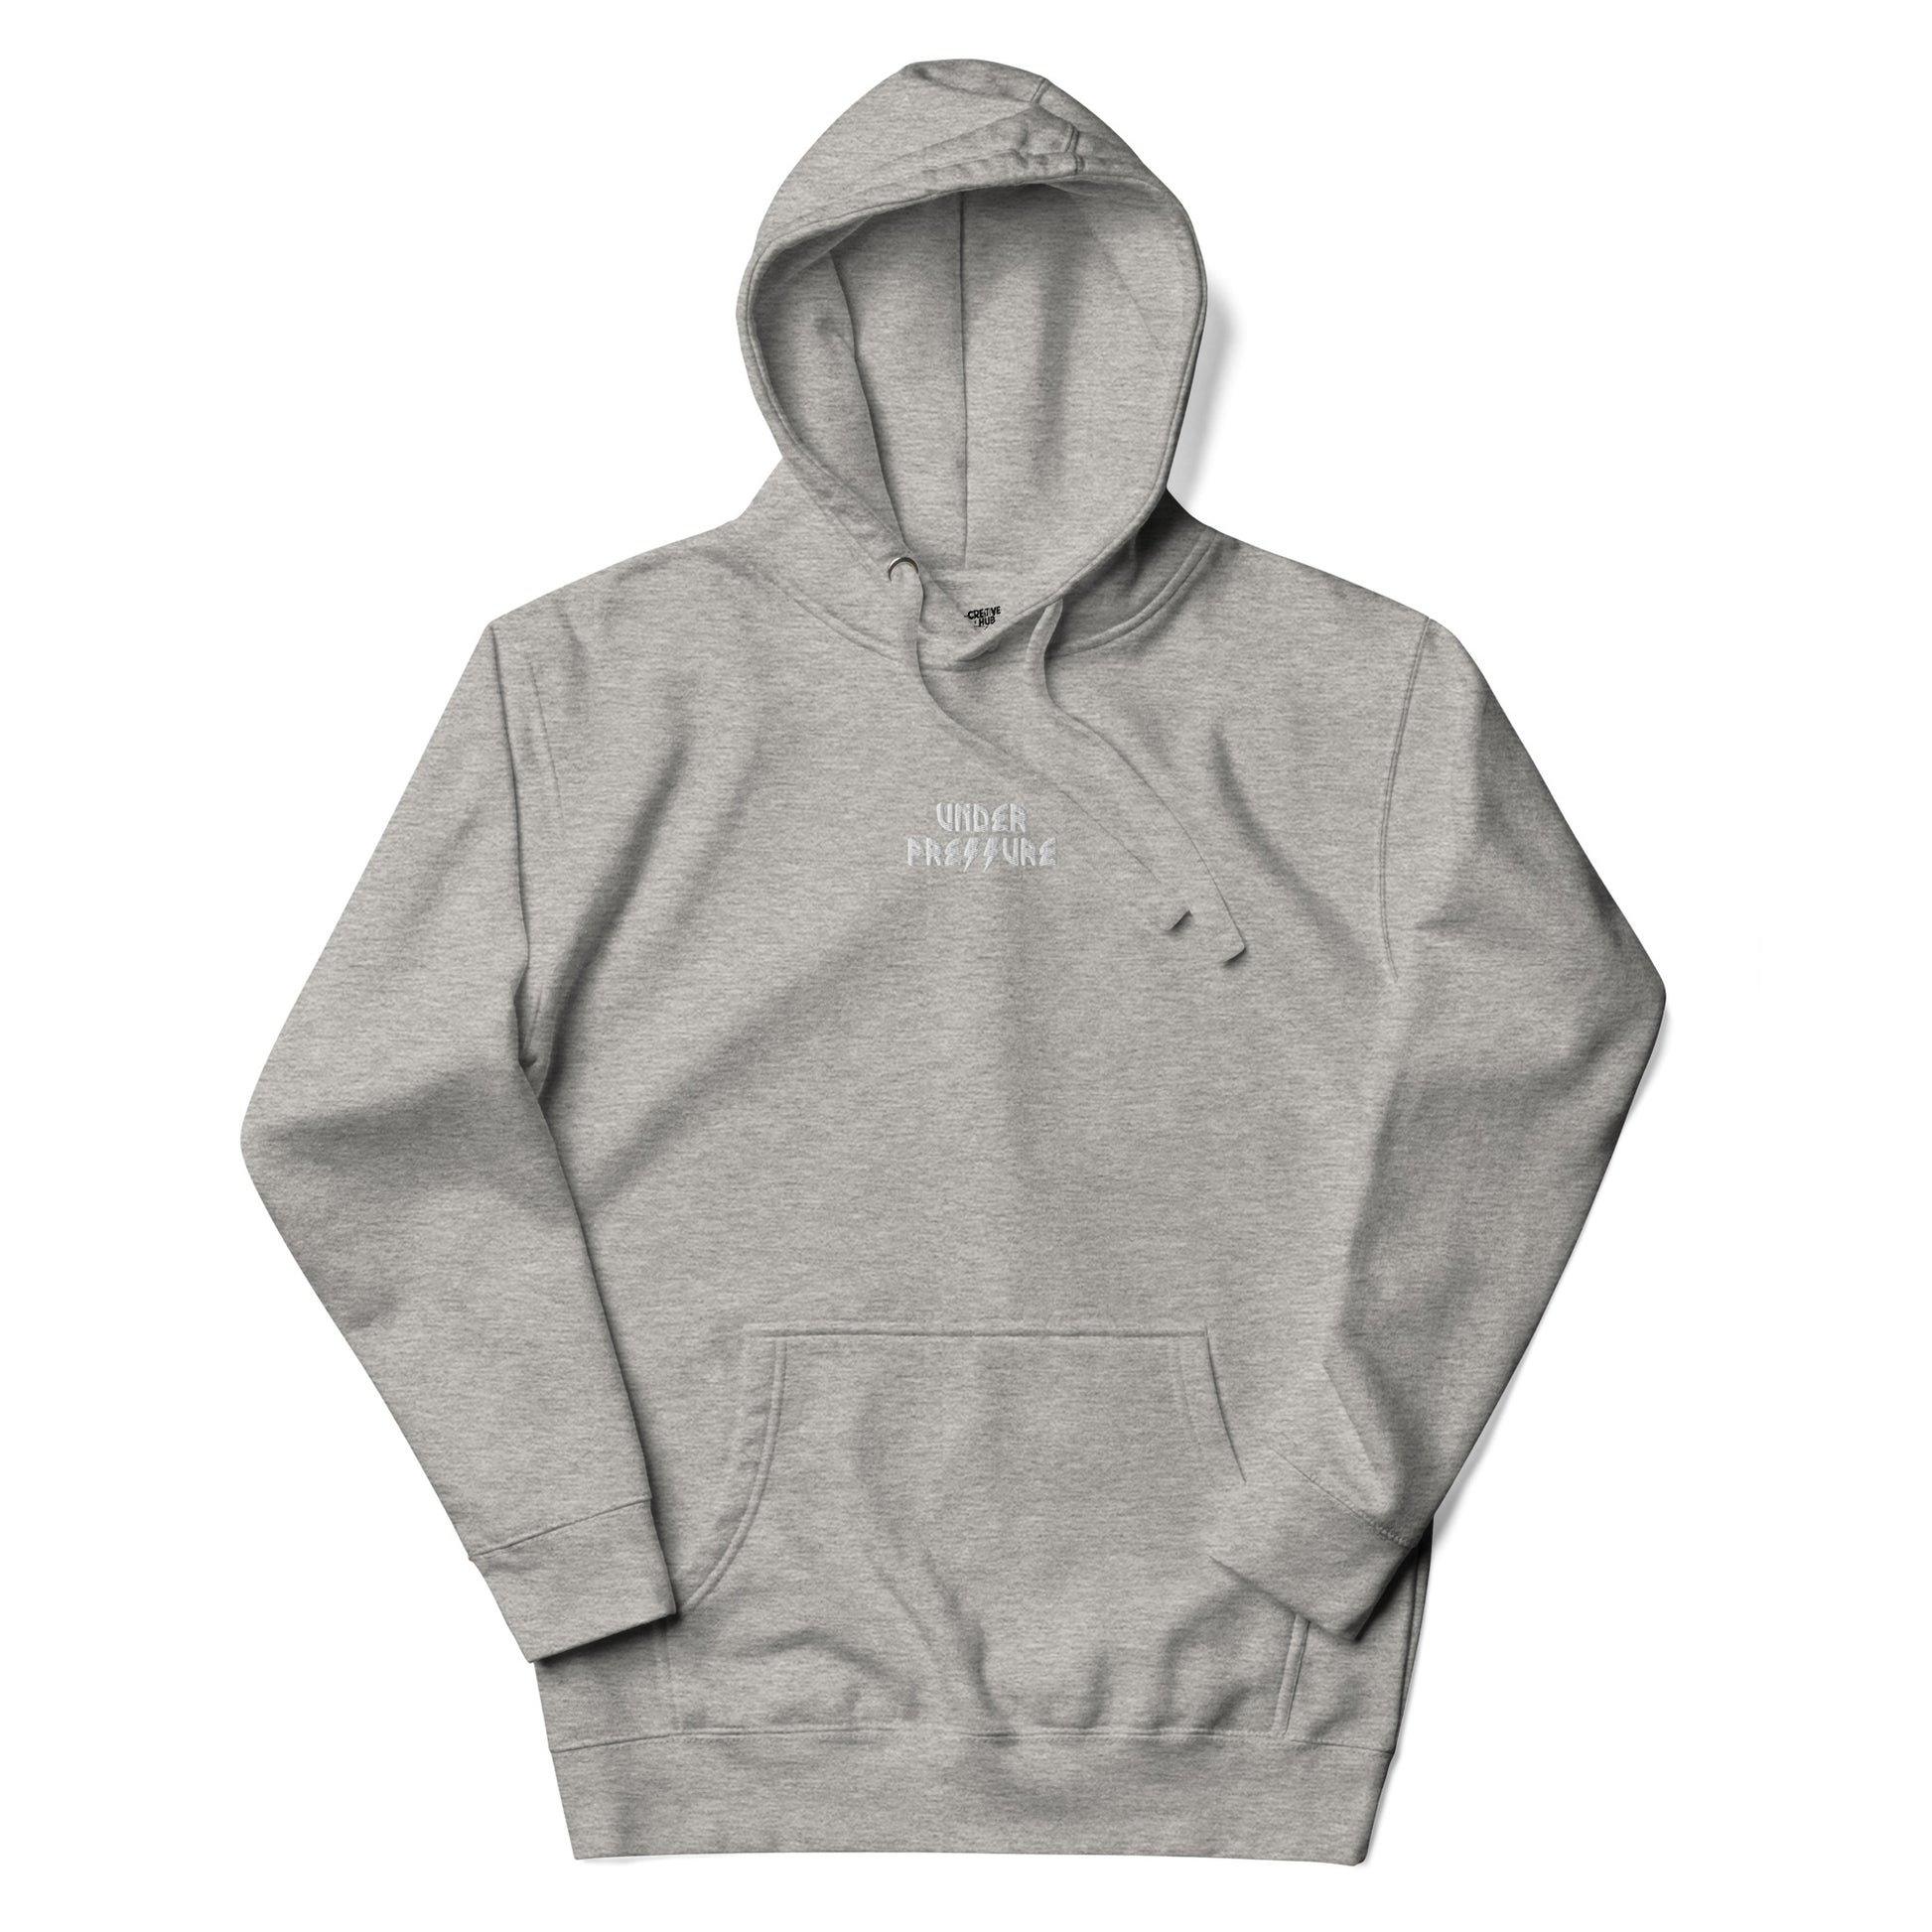 hoodie-from-the-front-with-teddy-bear-symbol